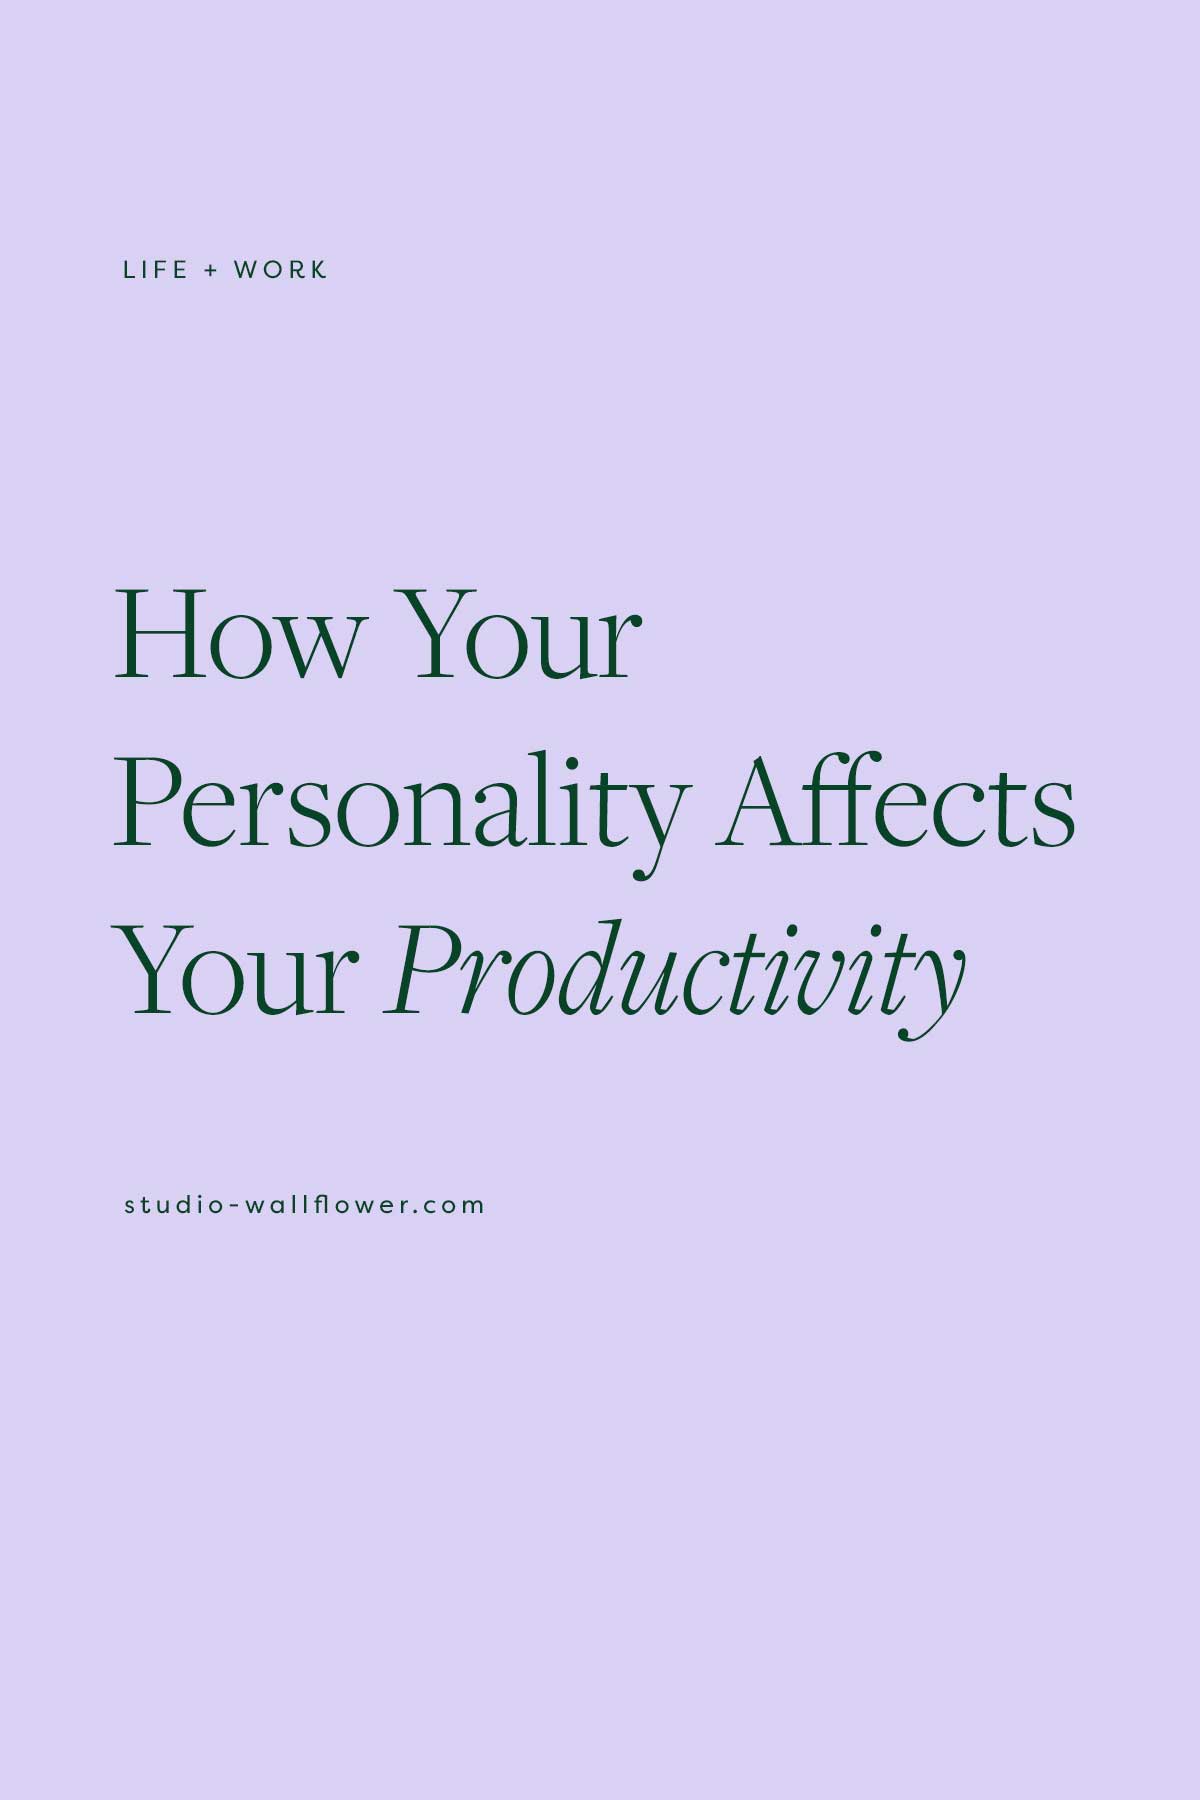 How Your Personality Affects Your Productivity